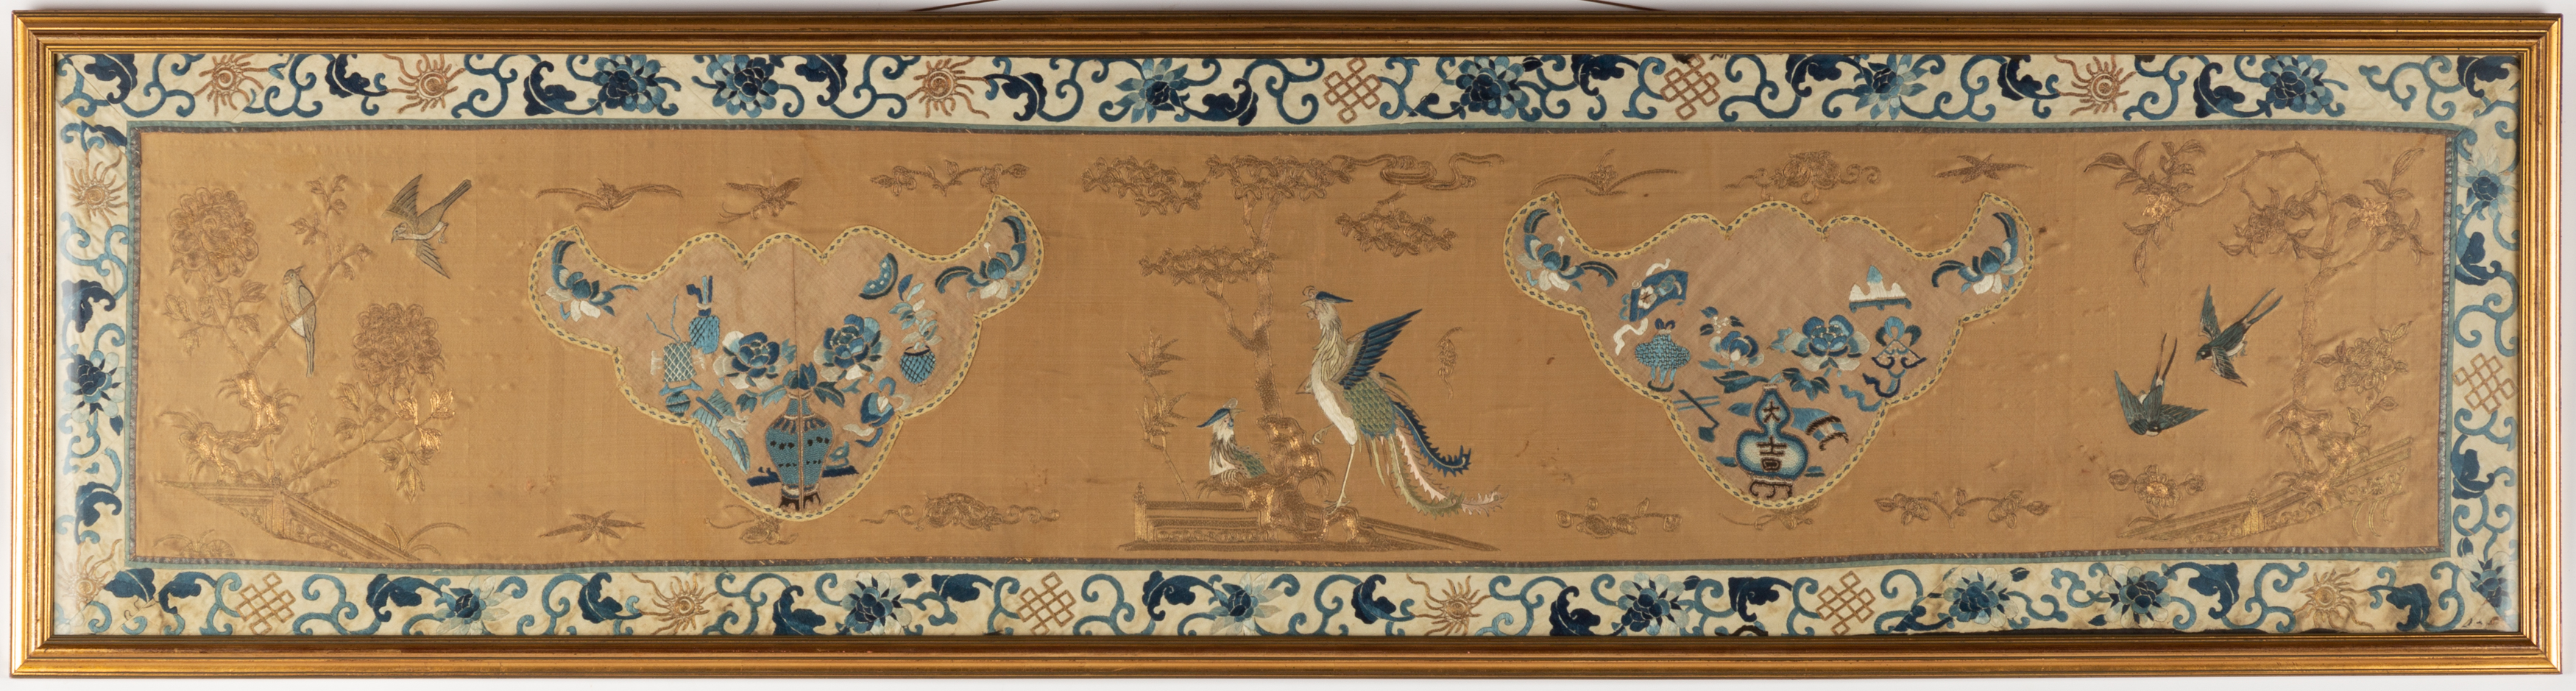 CHINESE SILK EMBROIDERED PANEL 2c878a